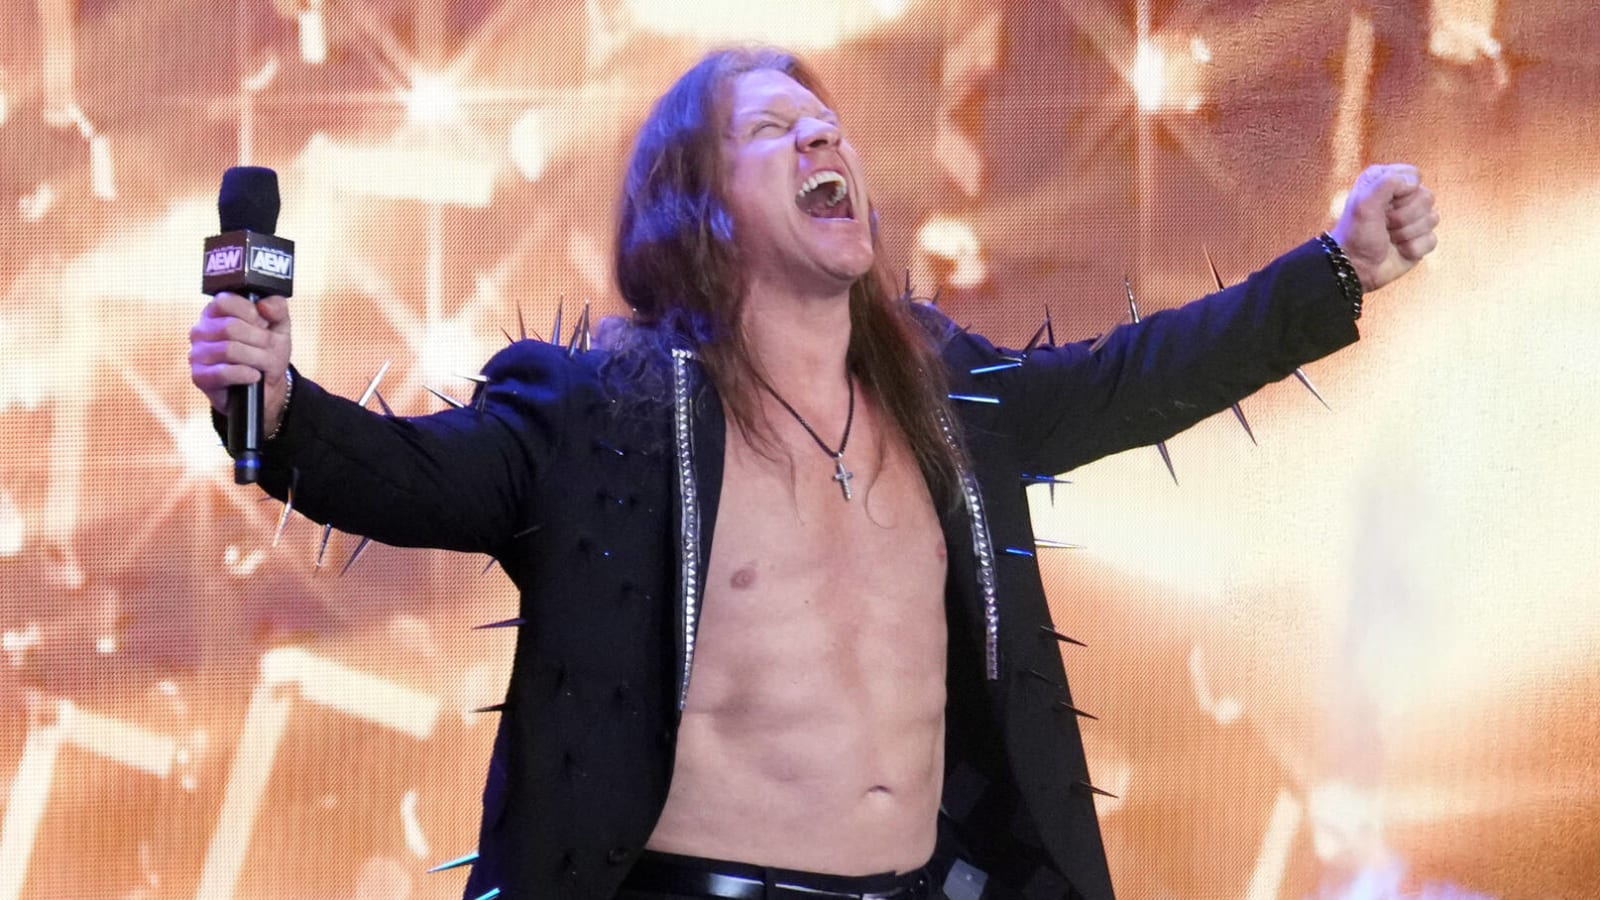 Chris Jericho fires back at WWE after head-to-head ratings battle